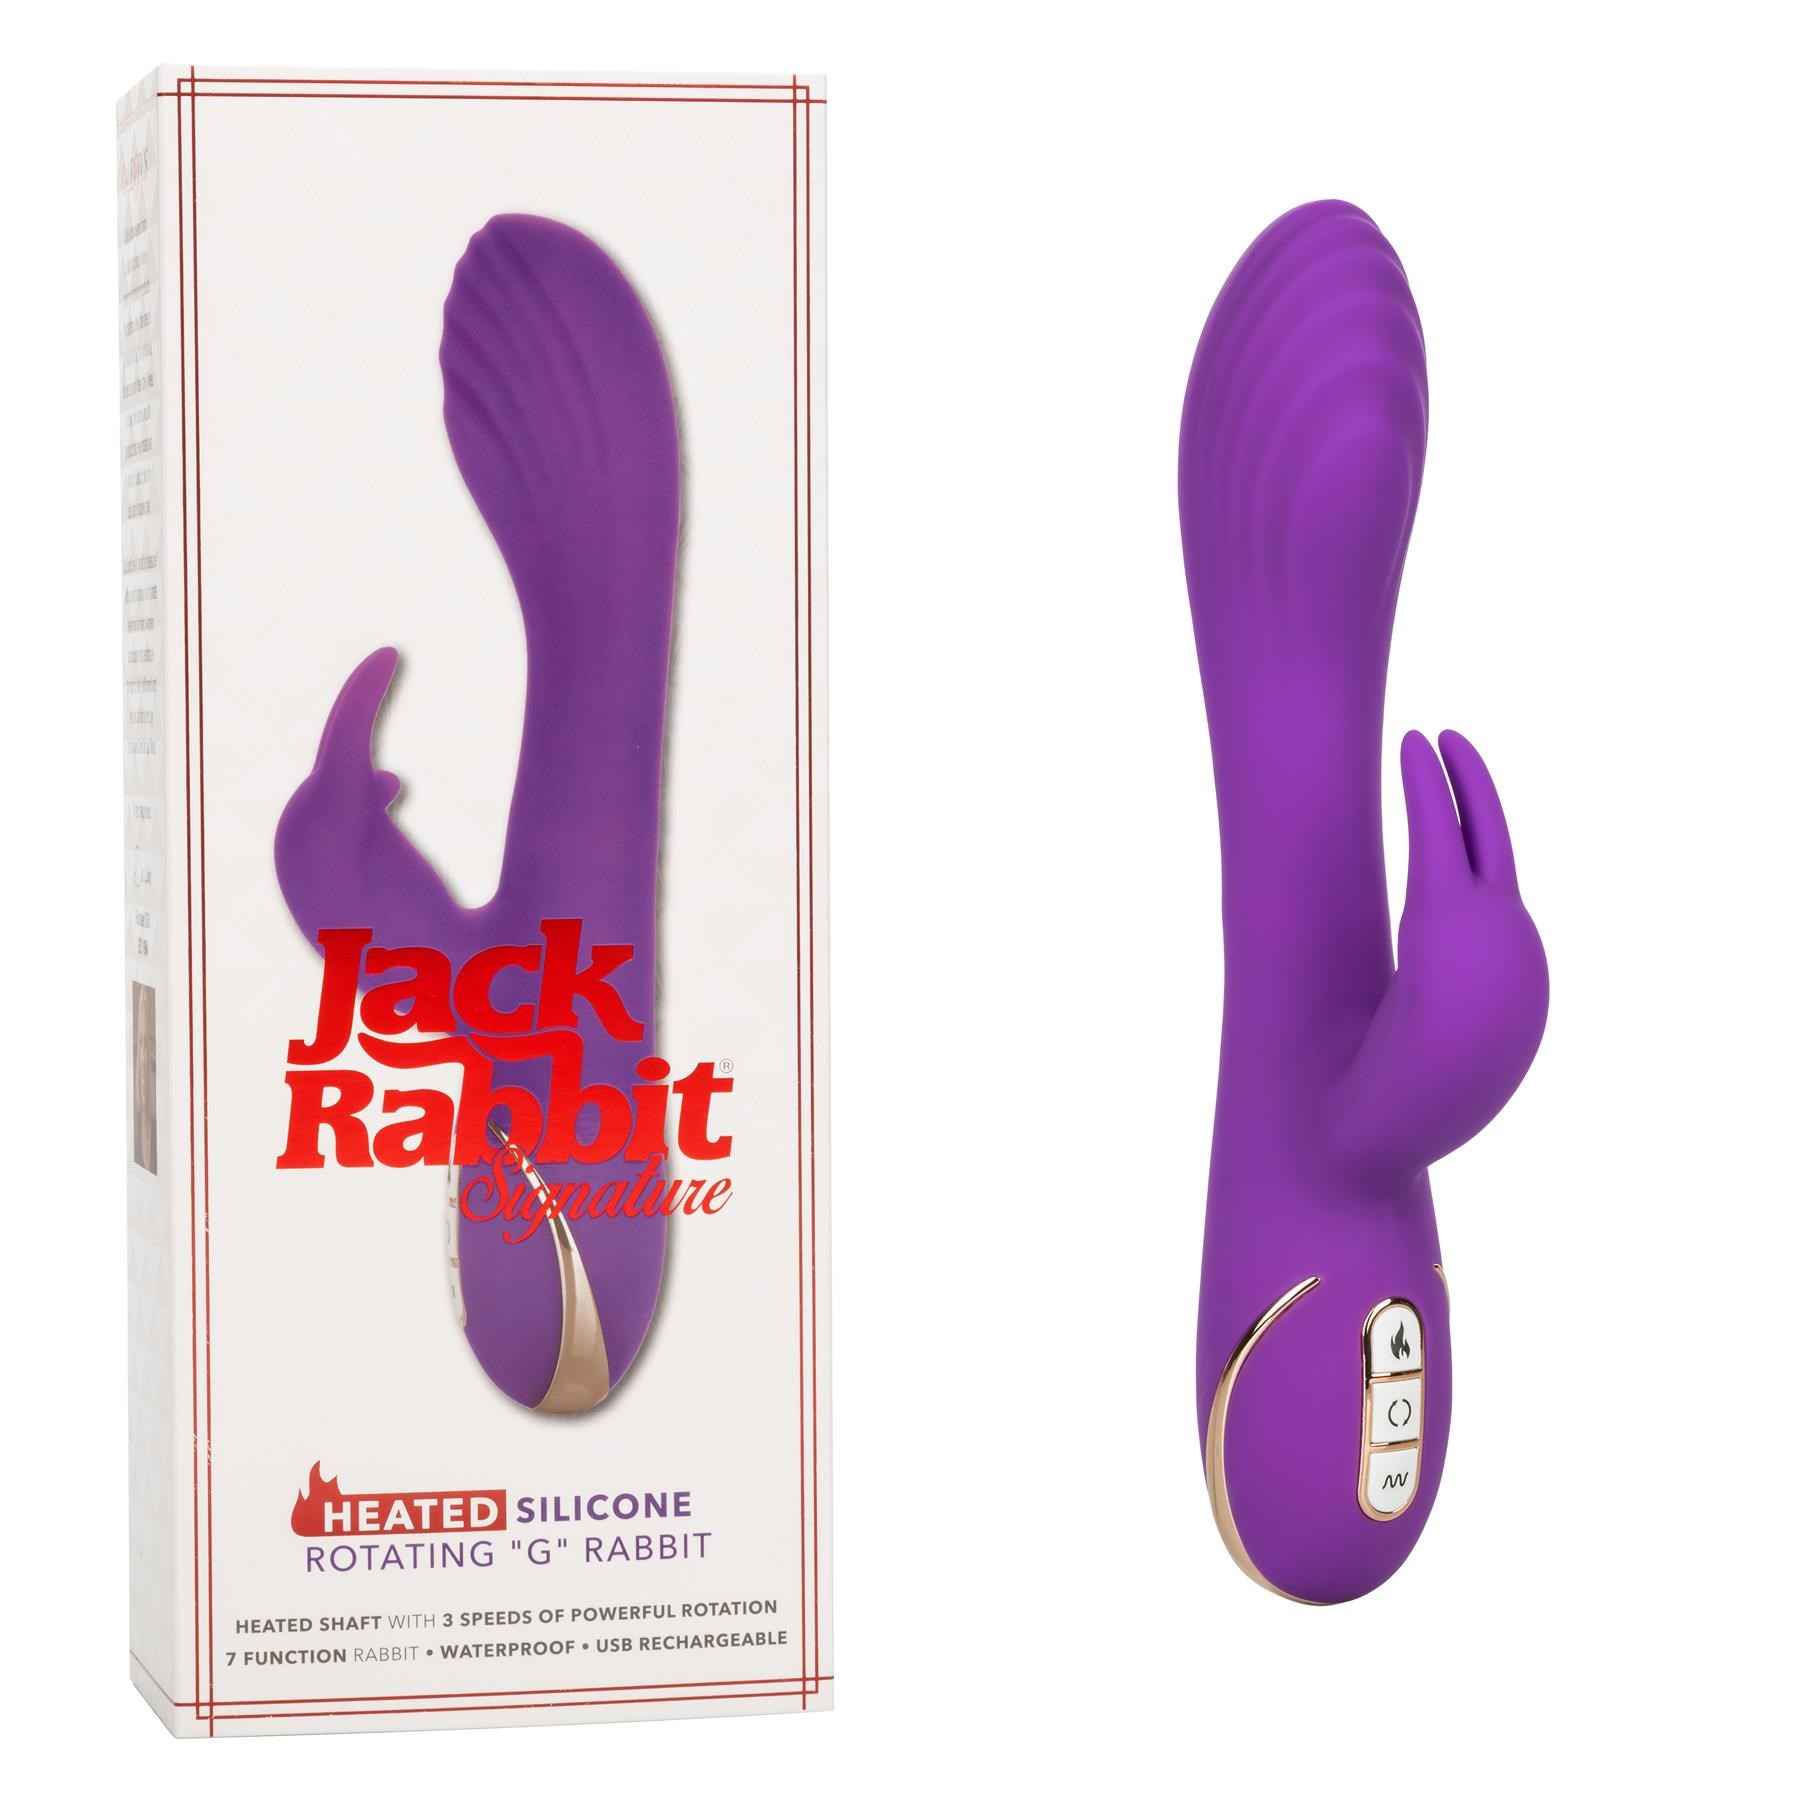 Jack Rabbit Heated Rotating G Rabbit- Product and Packaging